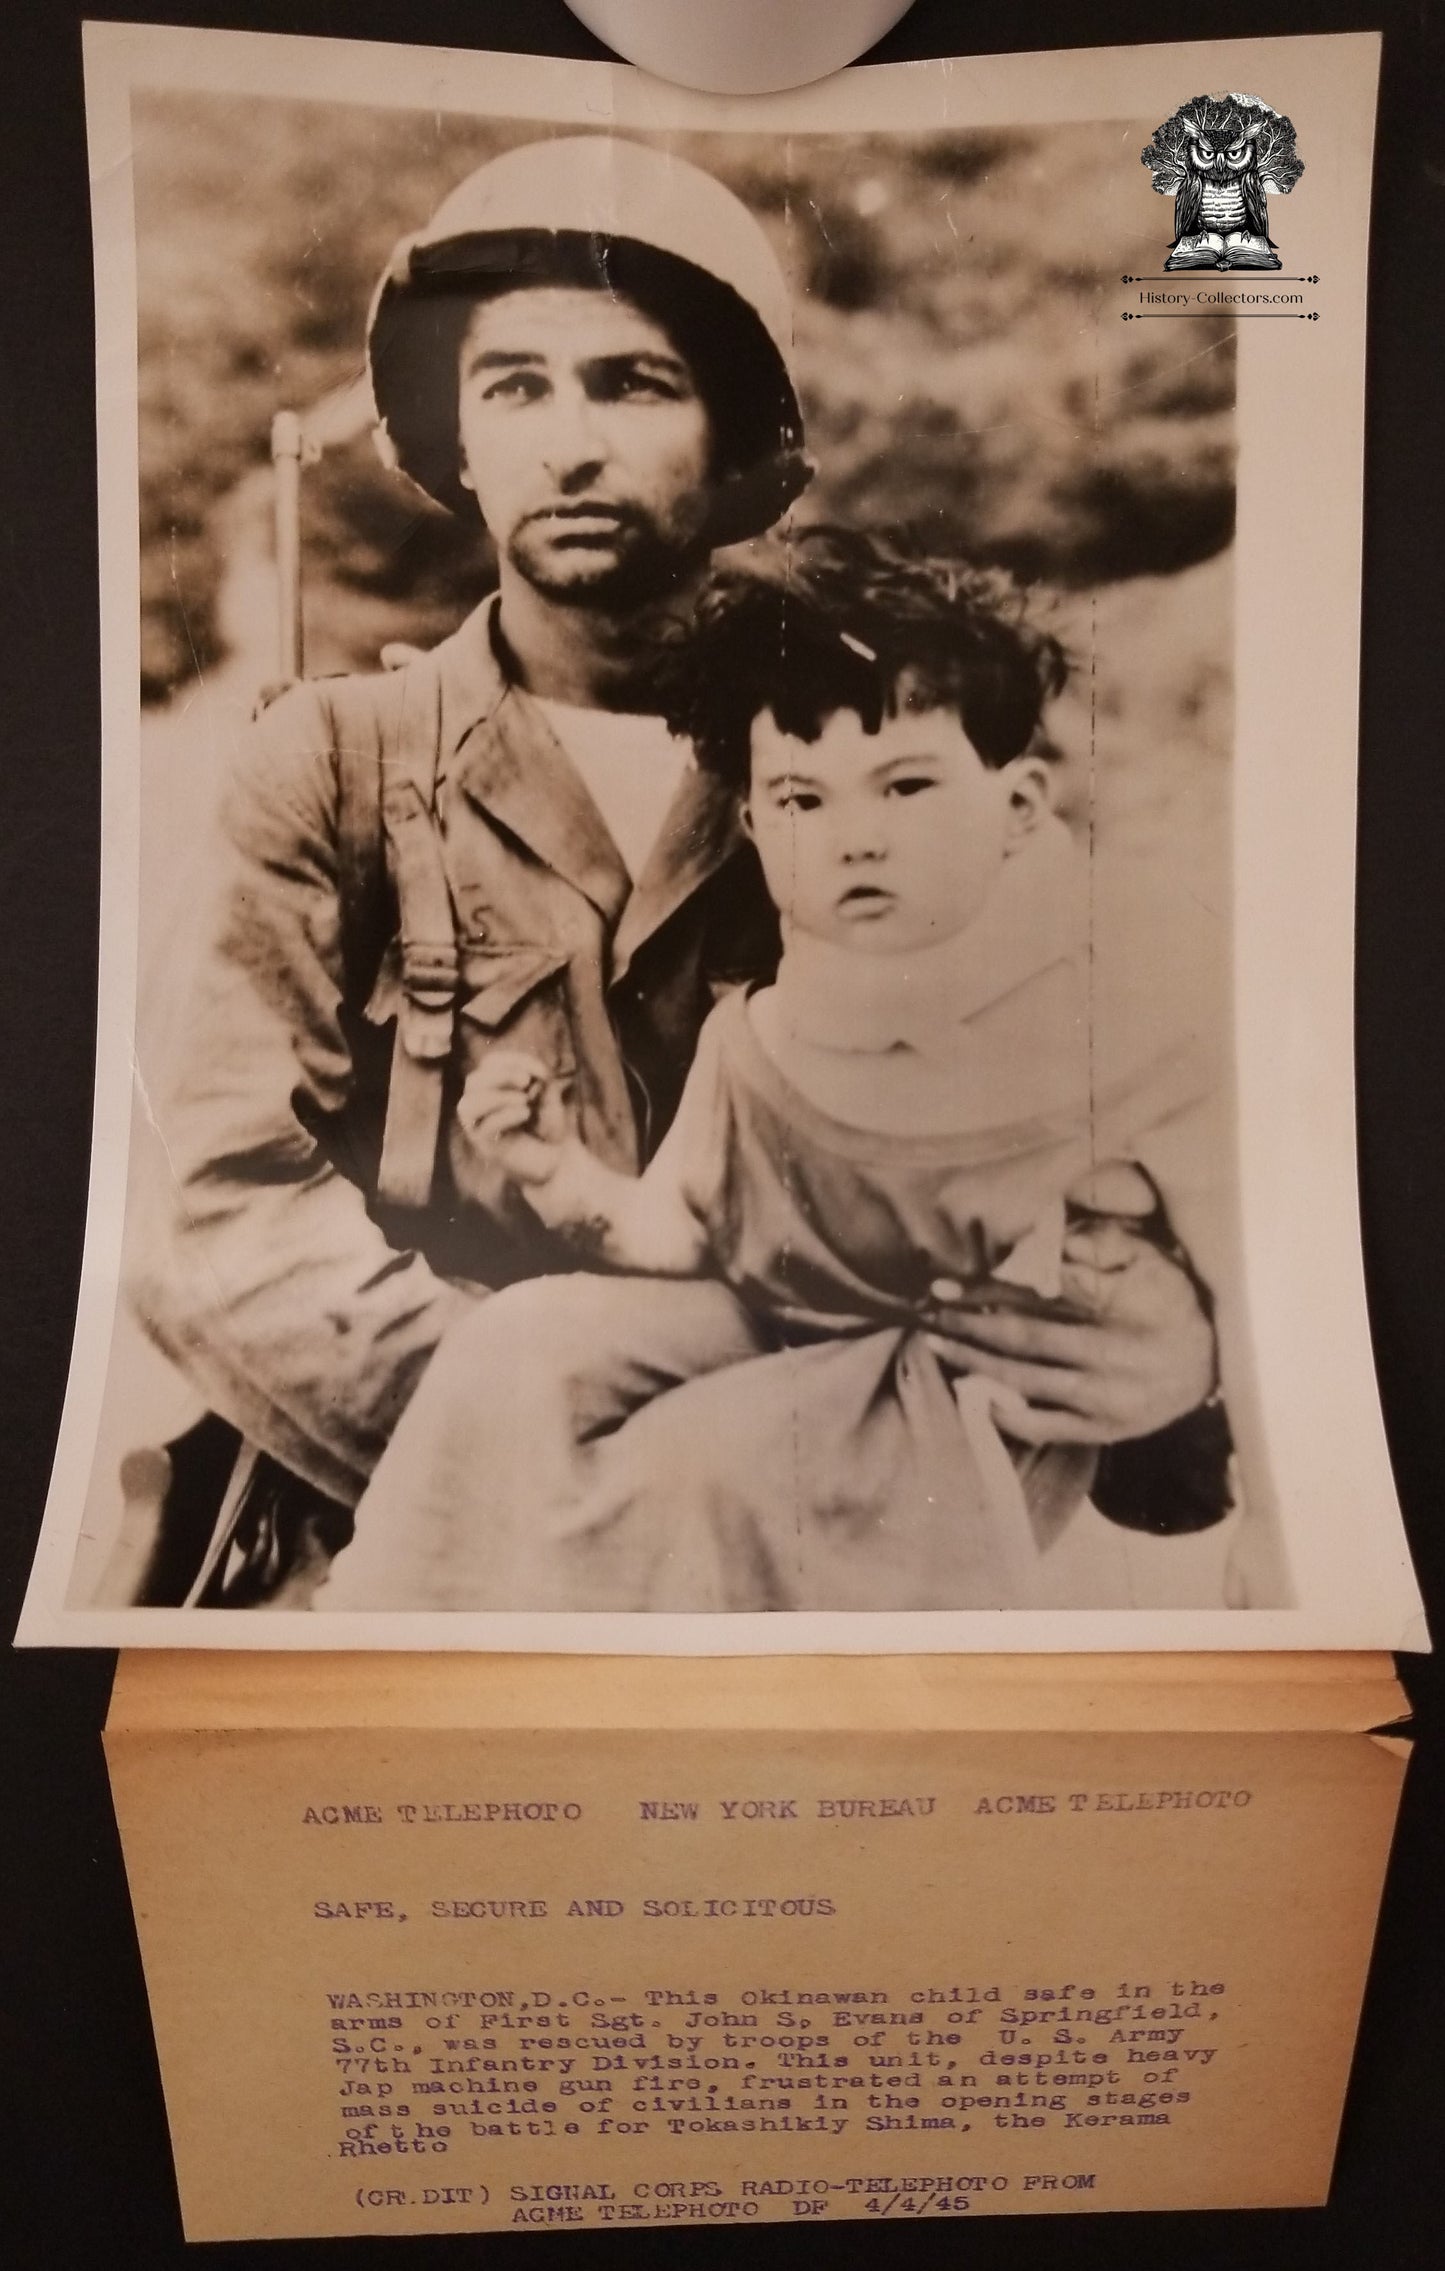 1945 WWII Acme Newspictures Signal Corps Radio Telephoto New York Bureau - First Sgt John S Evans Springfield SC With Okinawan Child - US Army 77th Infantry Division - Battle For Tokashiki Shima The Kerama Retto